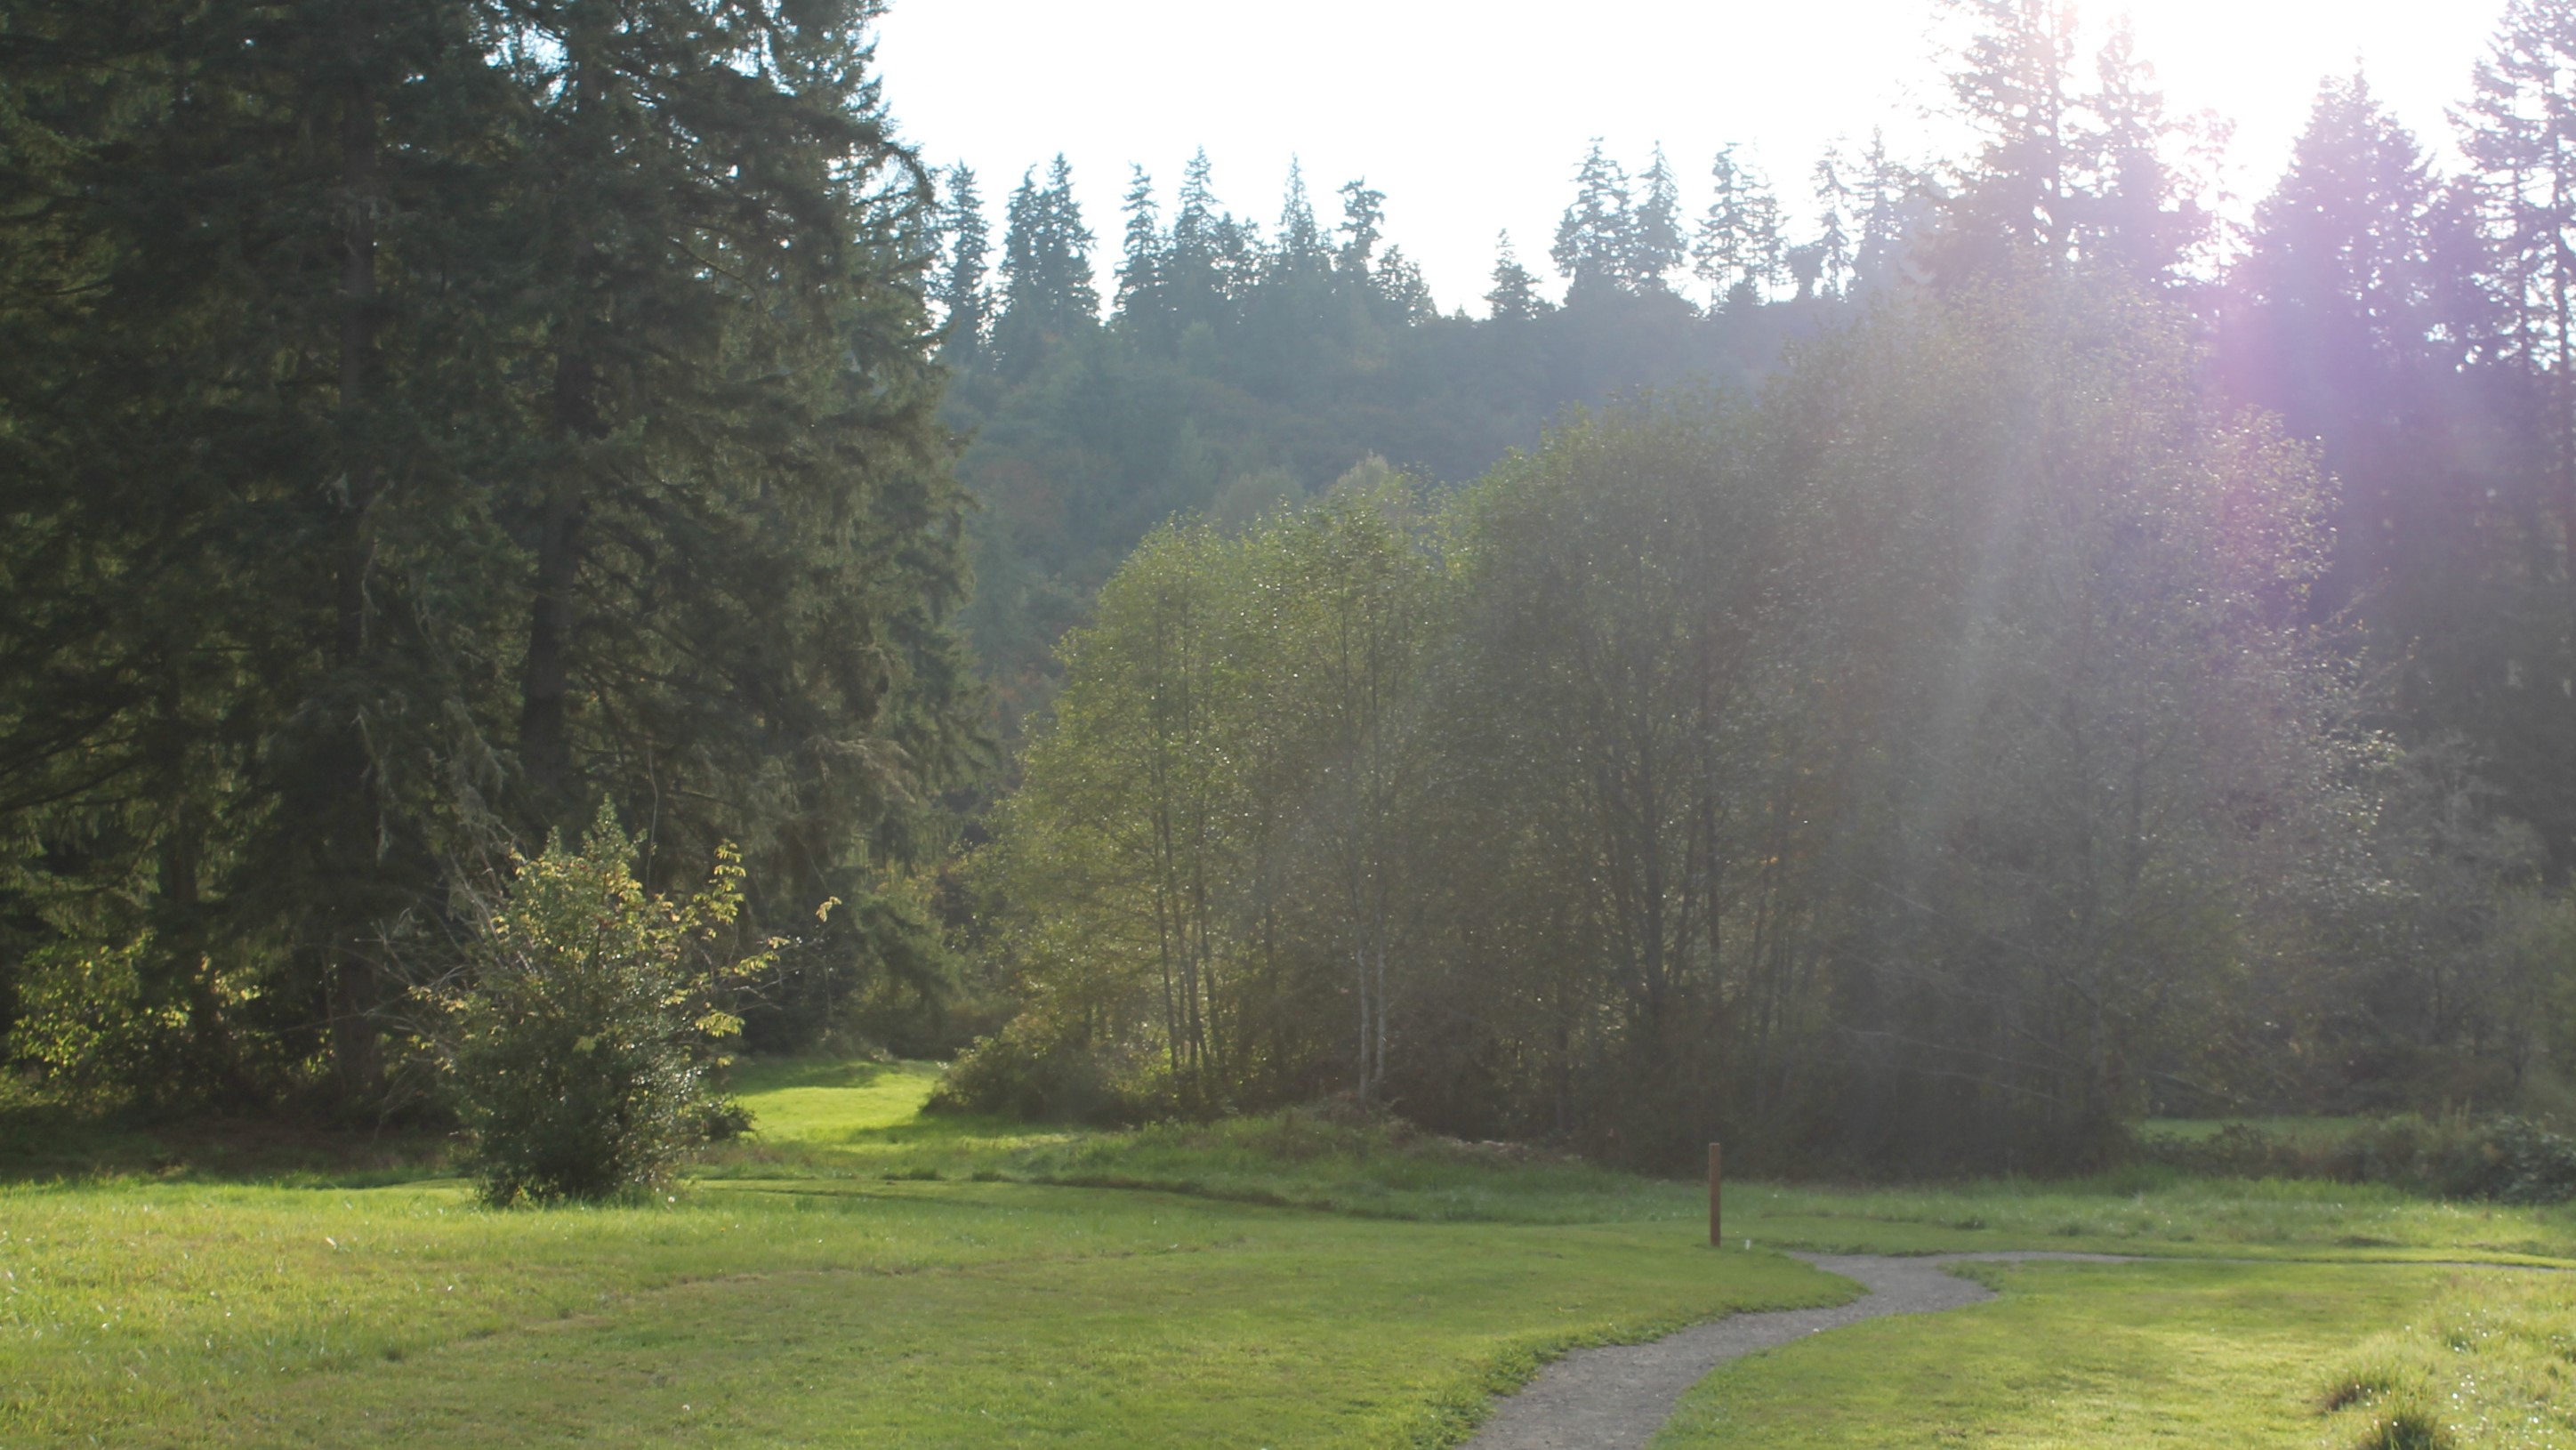 sun shining over a flat grassy area surrounded by trees at evans creek preserve